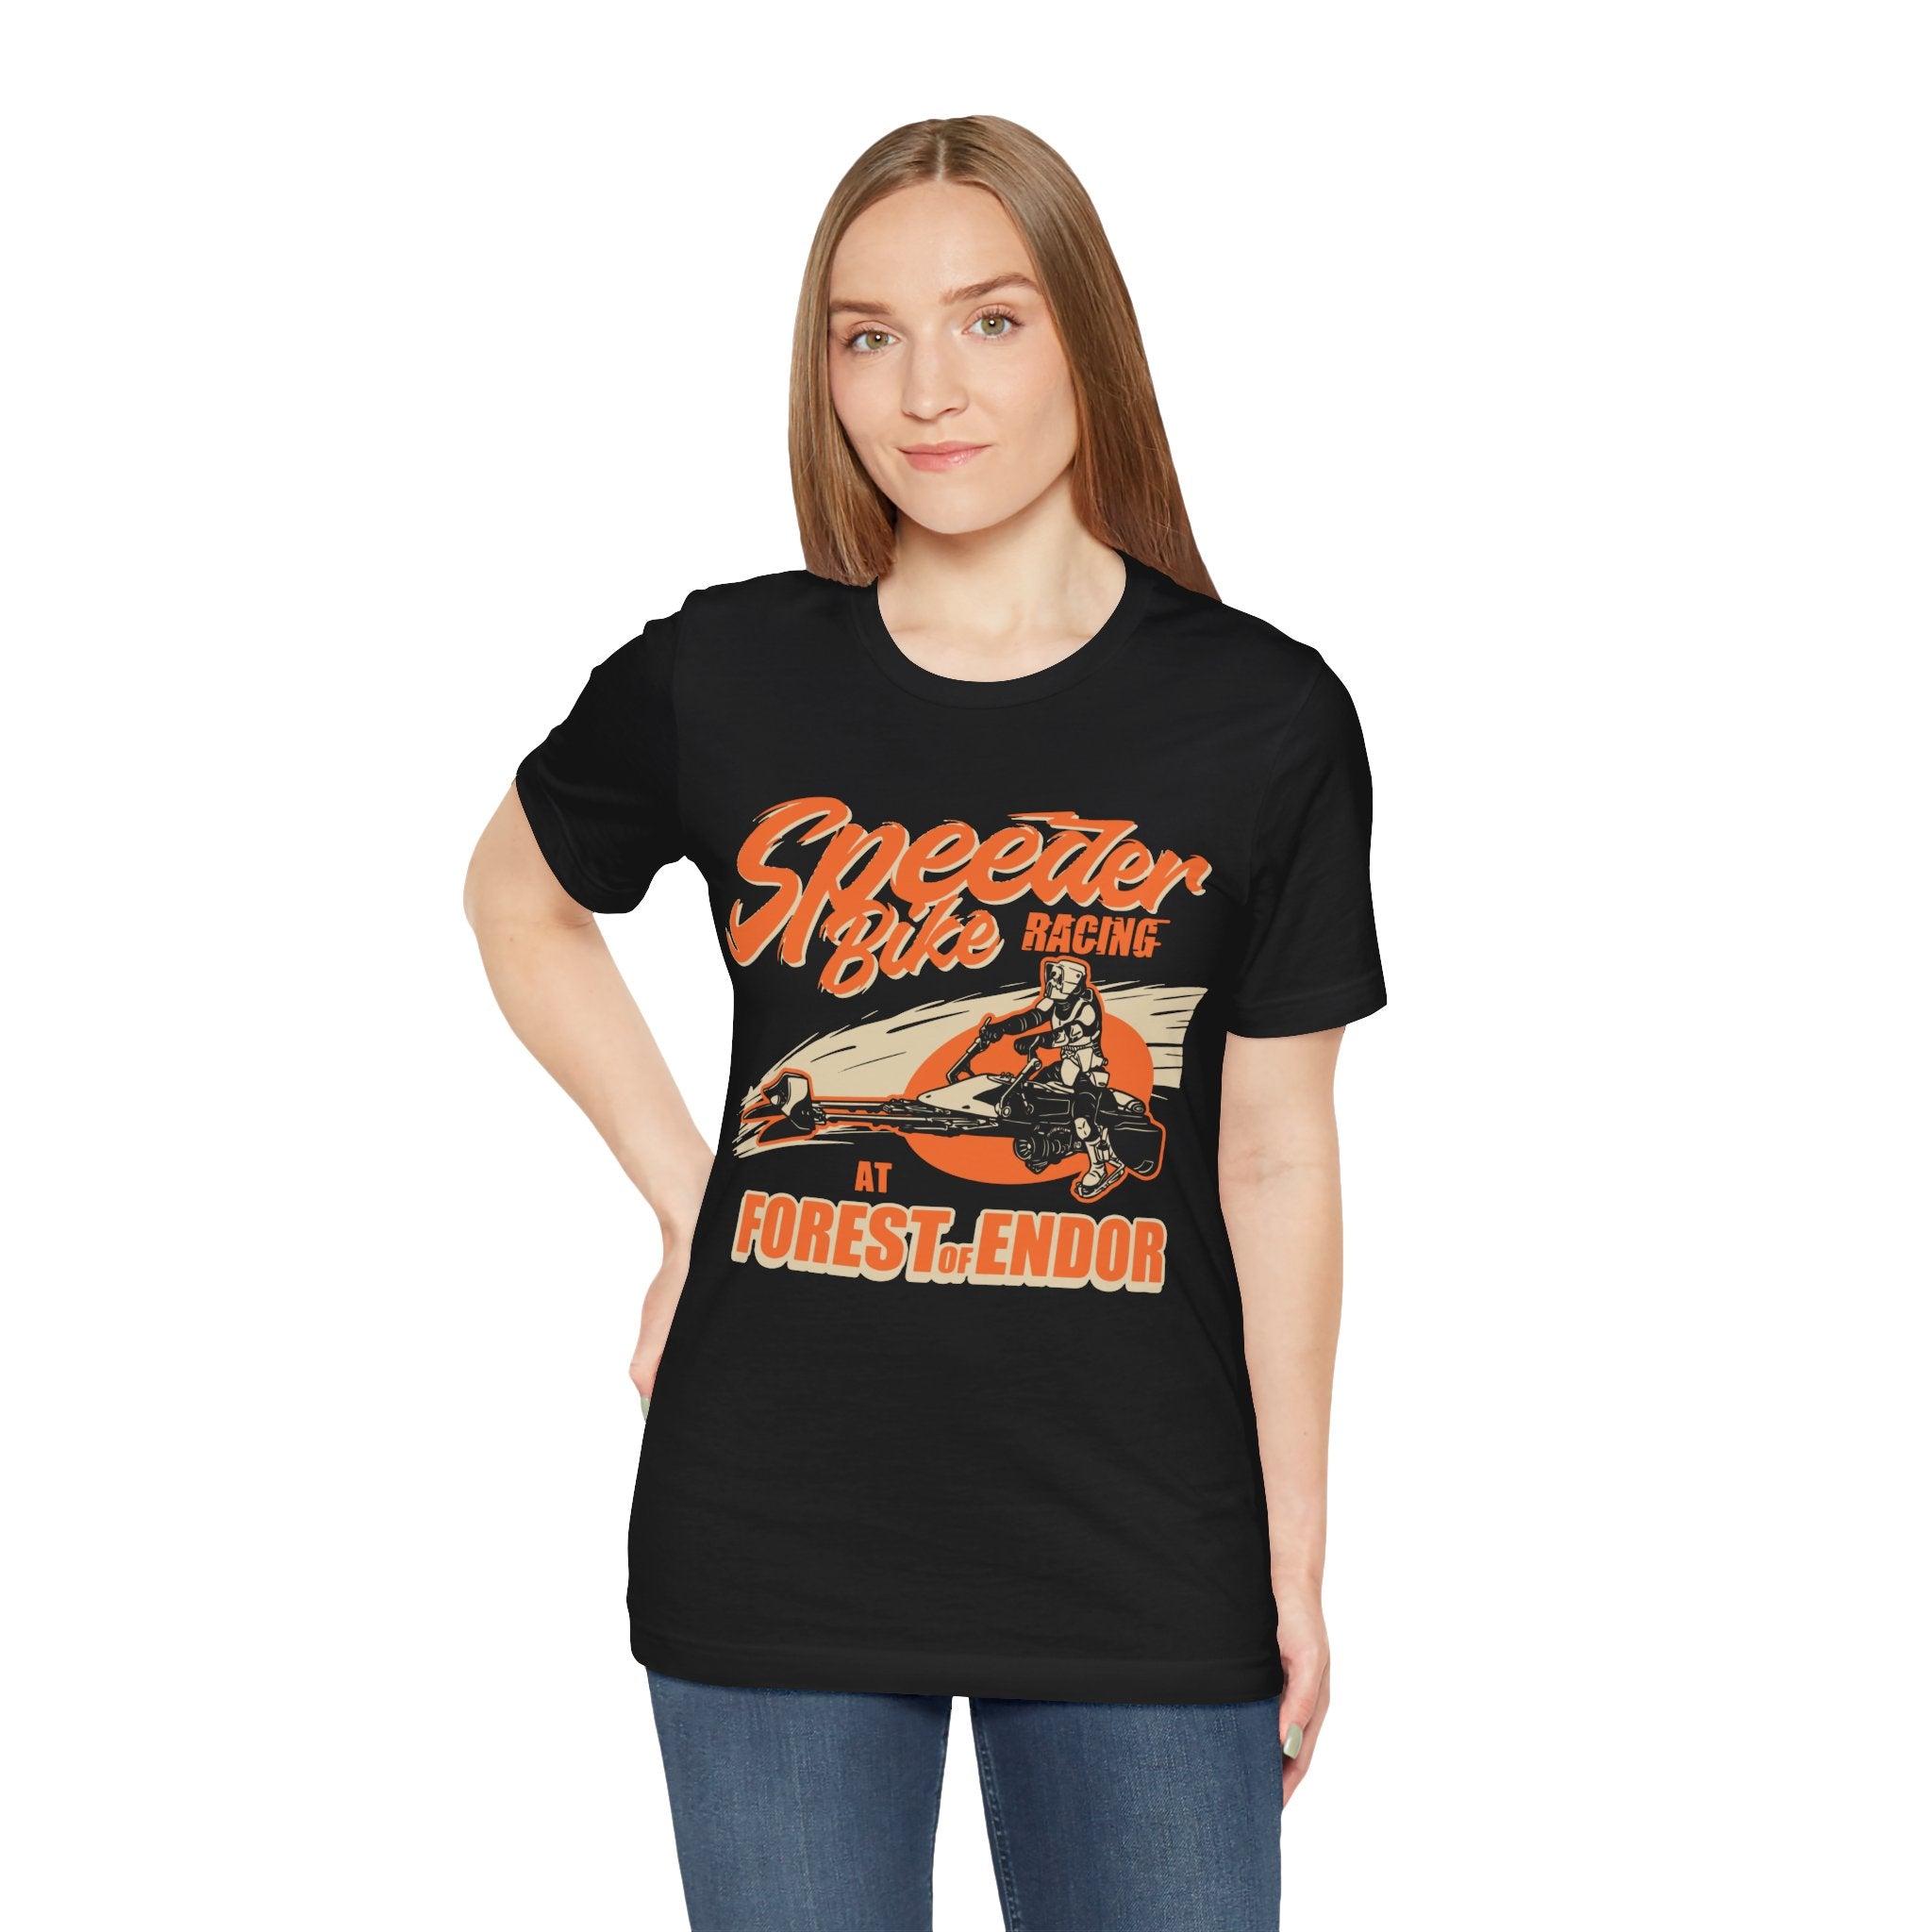 Sentence with product name: A woman wearing a black jersey tee with "Speeder Bike Racing" graphic print at Forest of Endor.